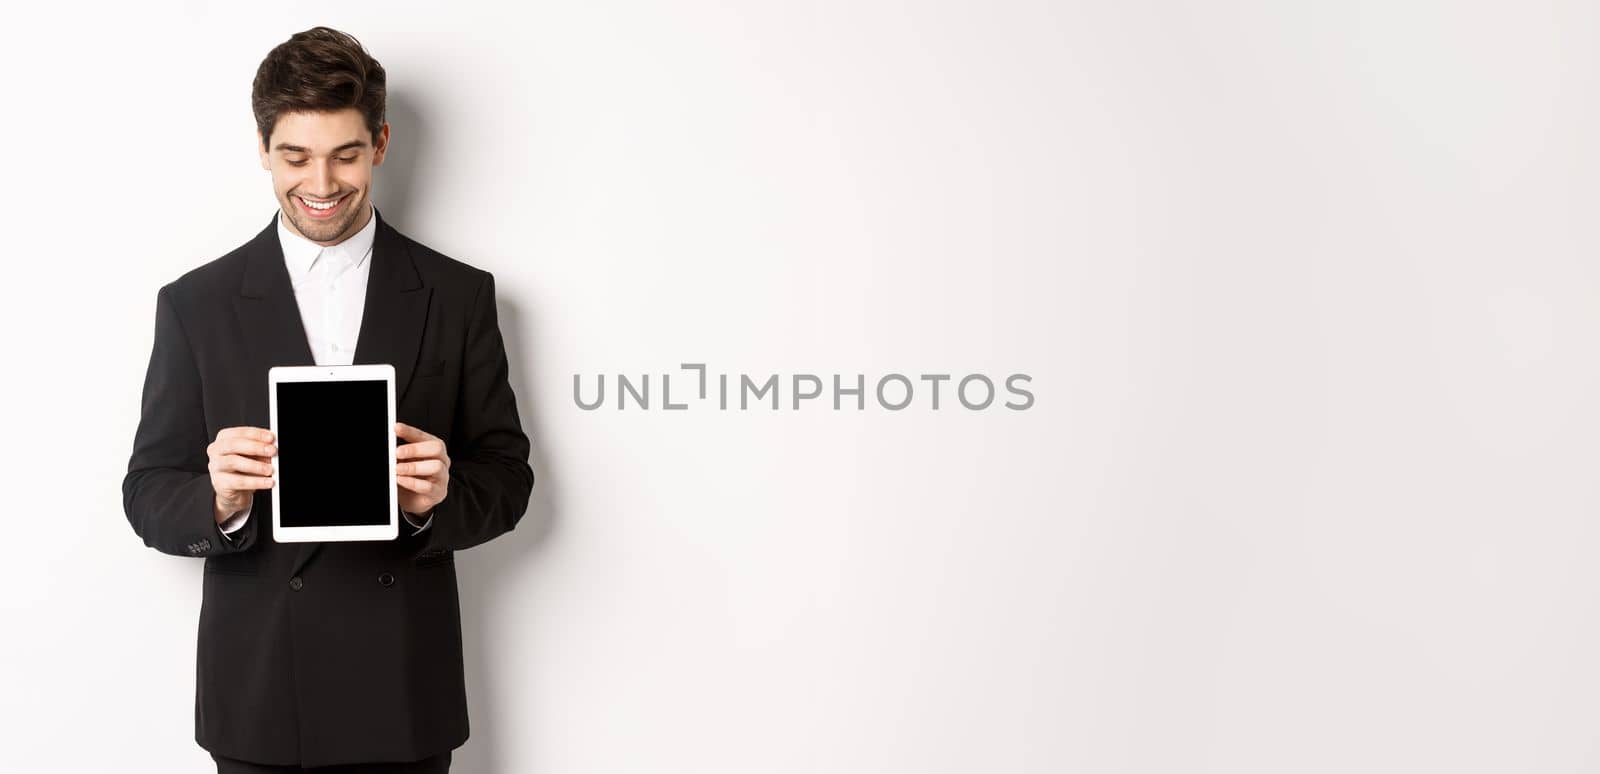 Image of good-looking male entrepreneur in black suit, looking down at digital tablet screen and showing advertisement, standing against white background.